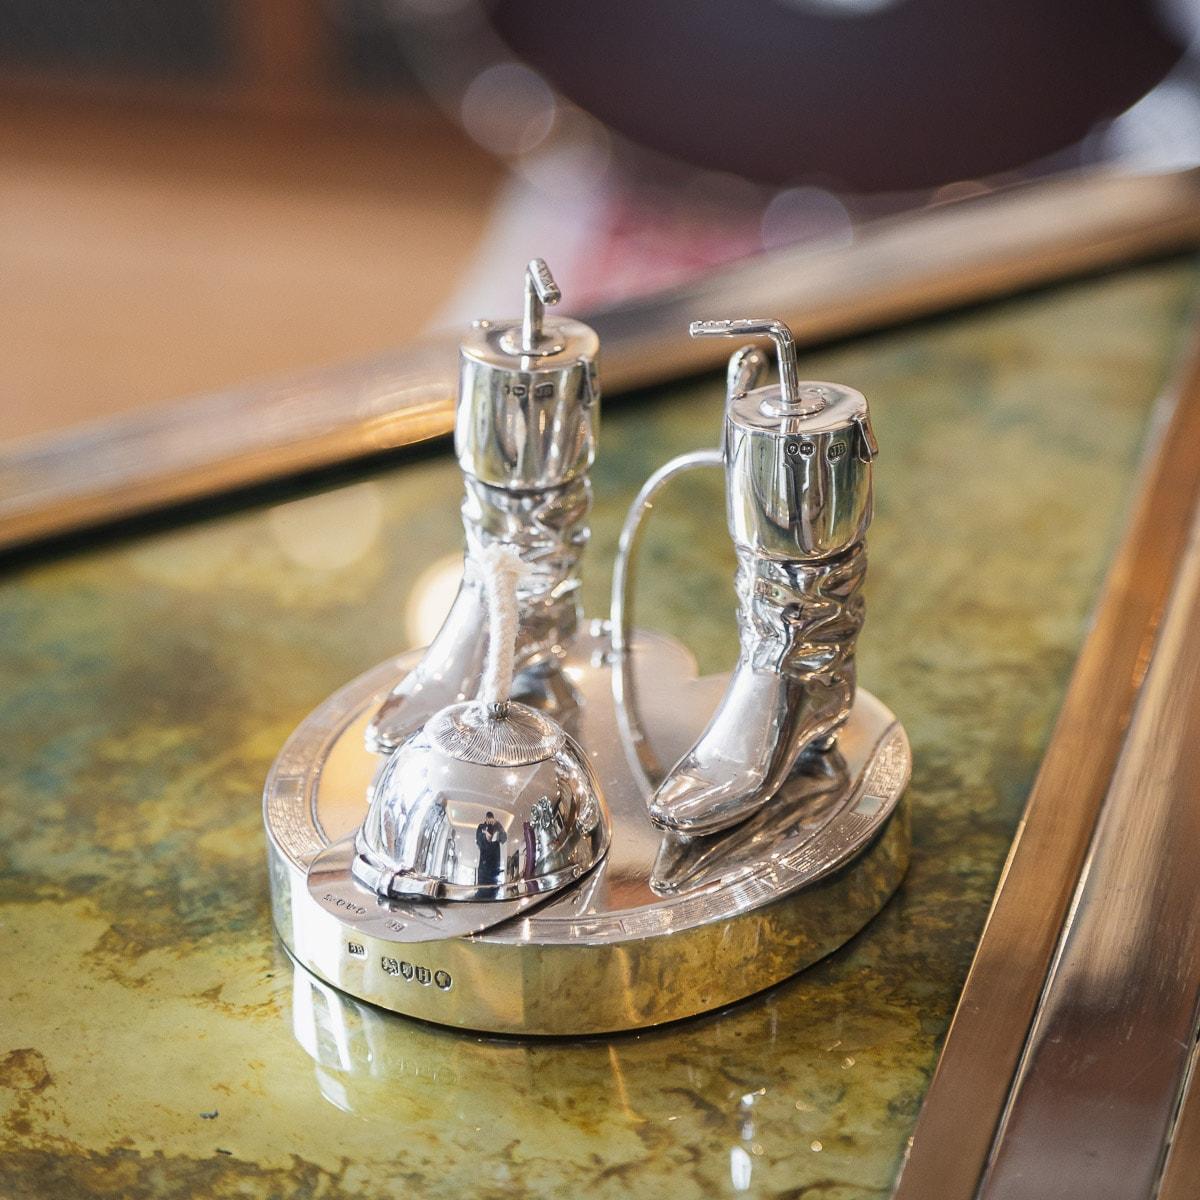 Antique 19th century Victorian solid silver table lighter, on a hoof stepped base, mounted with two jockey boots with a whip shaped lighter inserts, the jockey cap mounted with a wick and spur shaped handle. Hallmarked English Silver (925 standard),